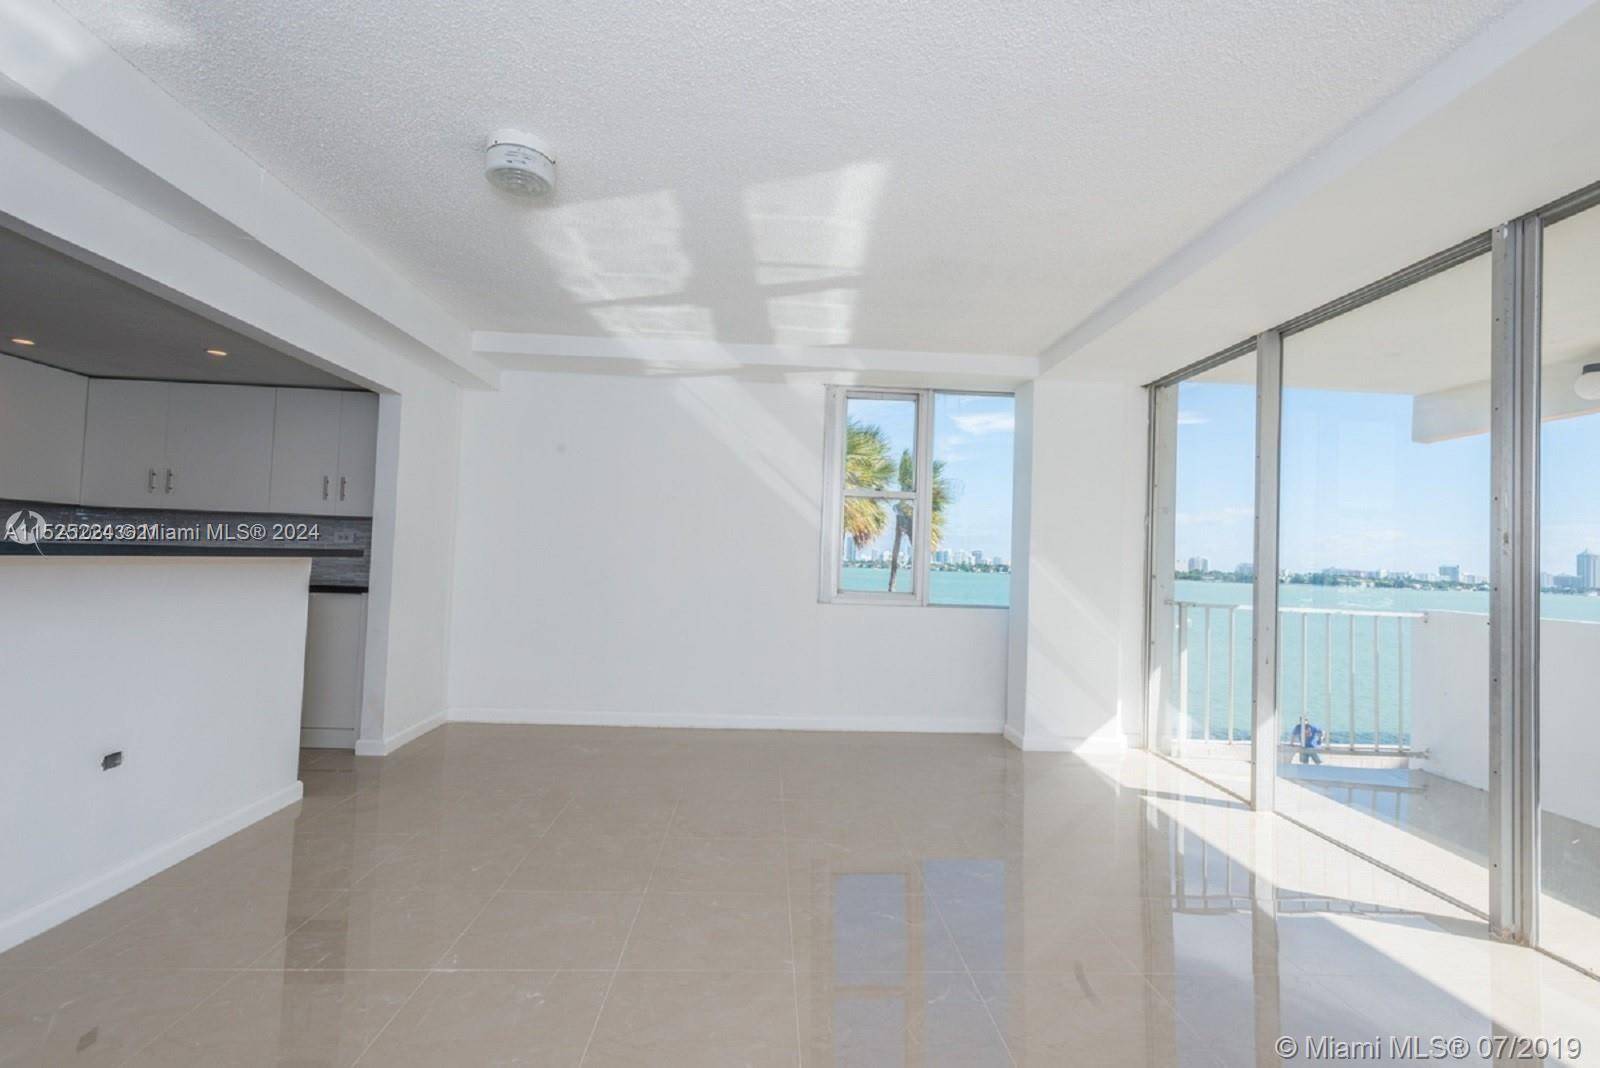 PROMO ONLY TWO MONTHS TO MOVE IN WONDERFULLY REMODELED CORNER UNIT APARTMENT WITH BEAUTIFUL VIEWS TO THE MIAMI BAY AND MIAMI BEACH !